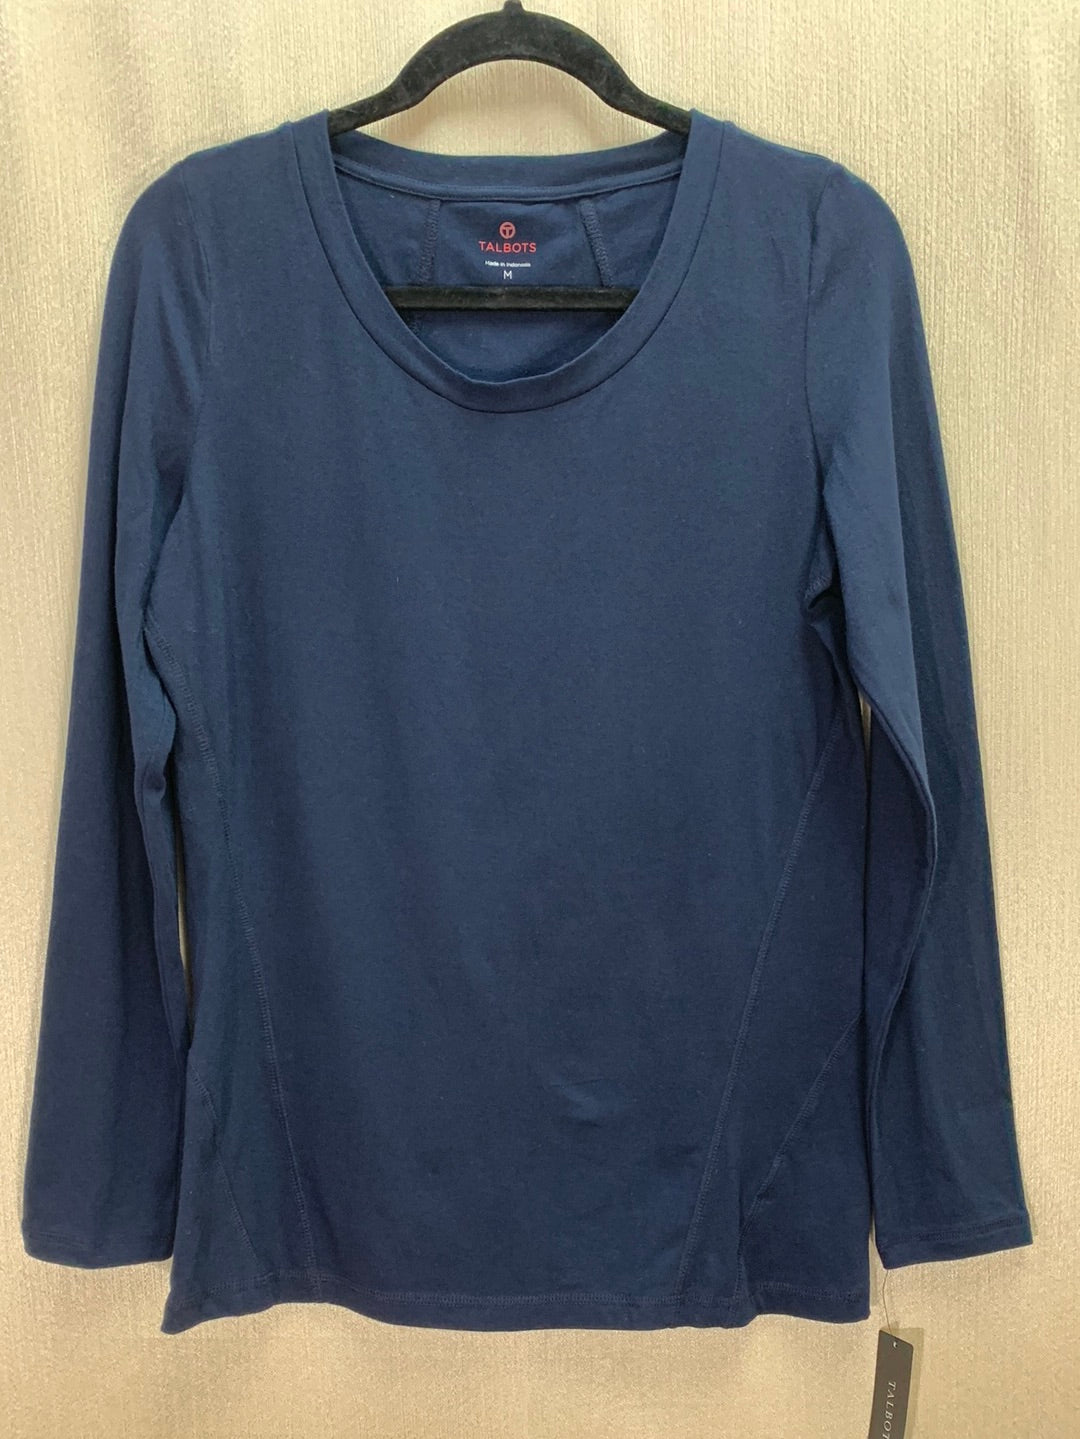 NWT - T by TALBOTS navy Cotton Modal Long Sleeve Top - M